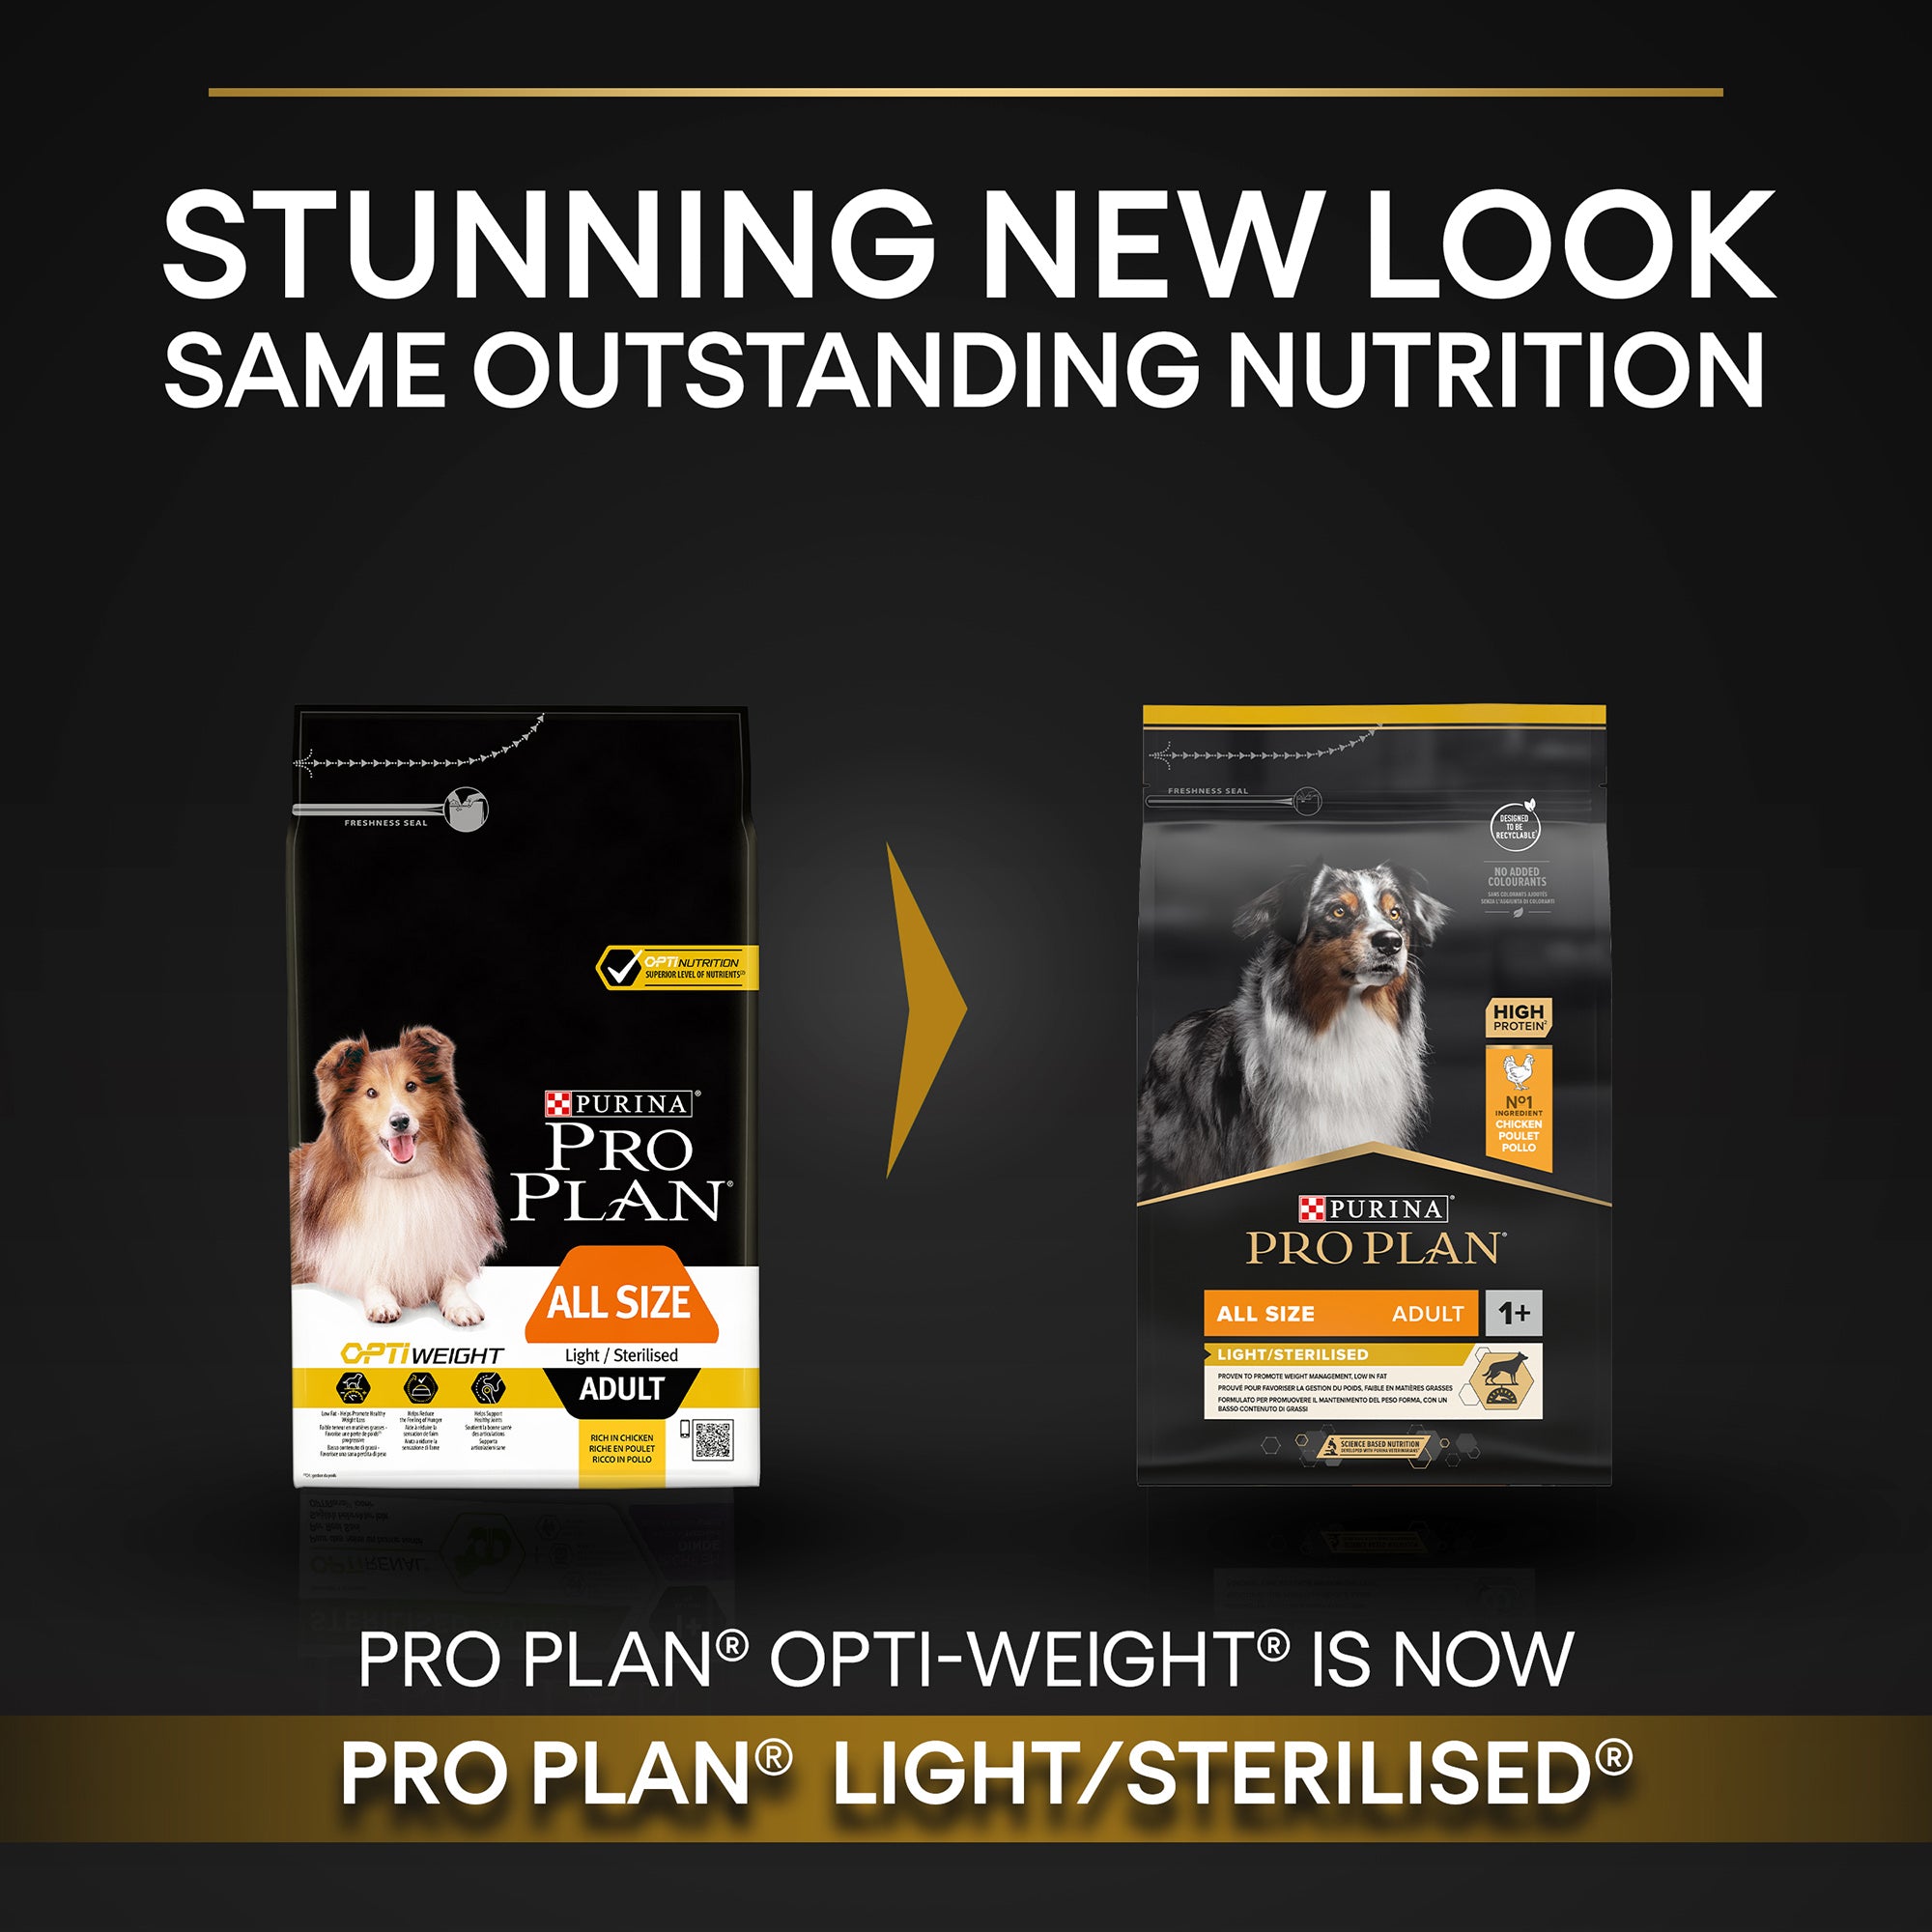 PURINA® Pro Plan® All Sizes Adult Light / Sterilised with OPTIWEIGHT®, Rich in Chicken Dry Dog Food - 3 KG